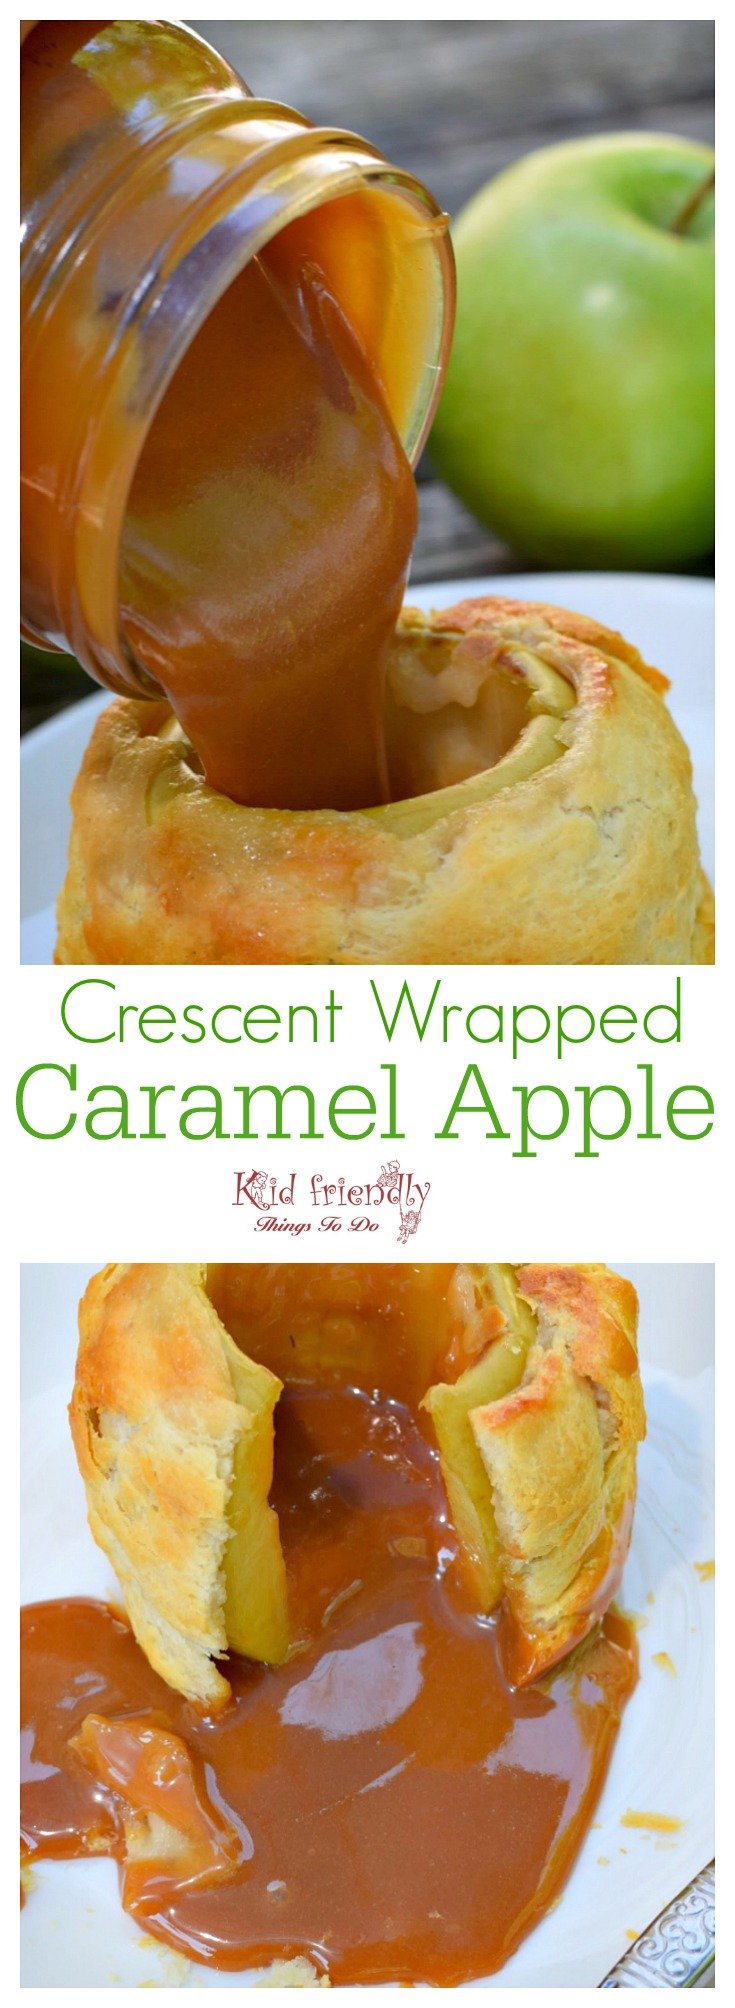 How to Make Homemade Crescent wrapped apples filled with caramel - Delicious and fun dessert - Easy to make www.kidfriendlythingstodo.com